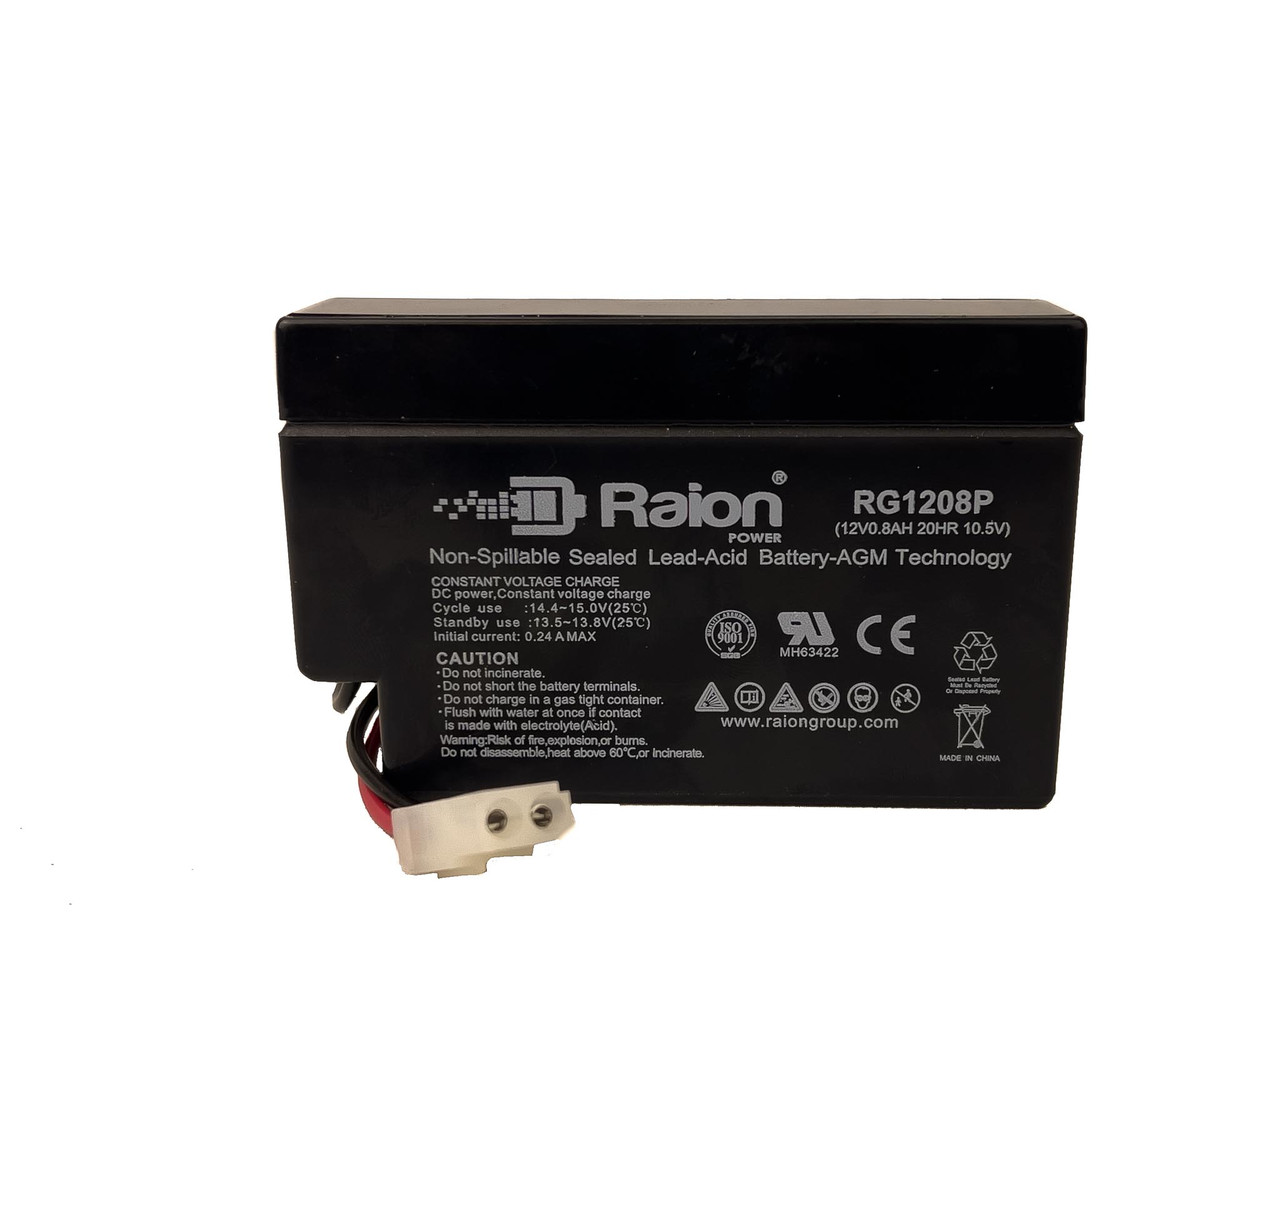 Raion Power 12V 0.8Ah SLA Battery With T1 Terminals For Plus Power PP12-0.8